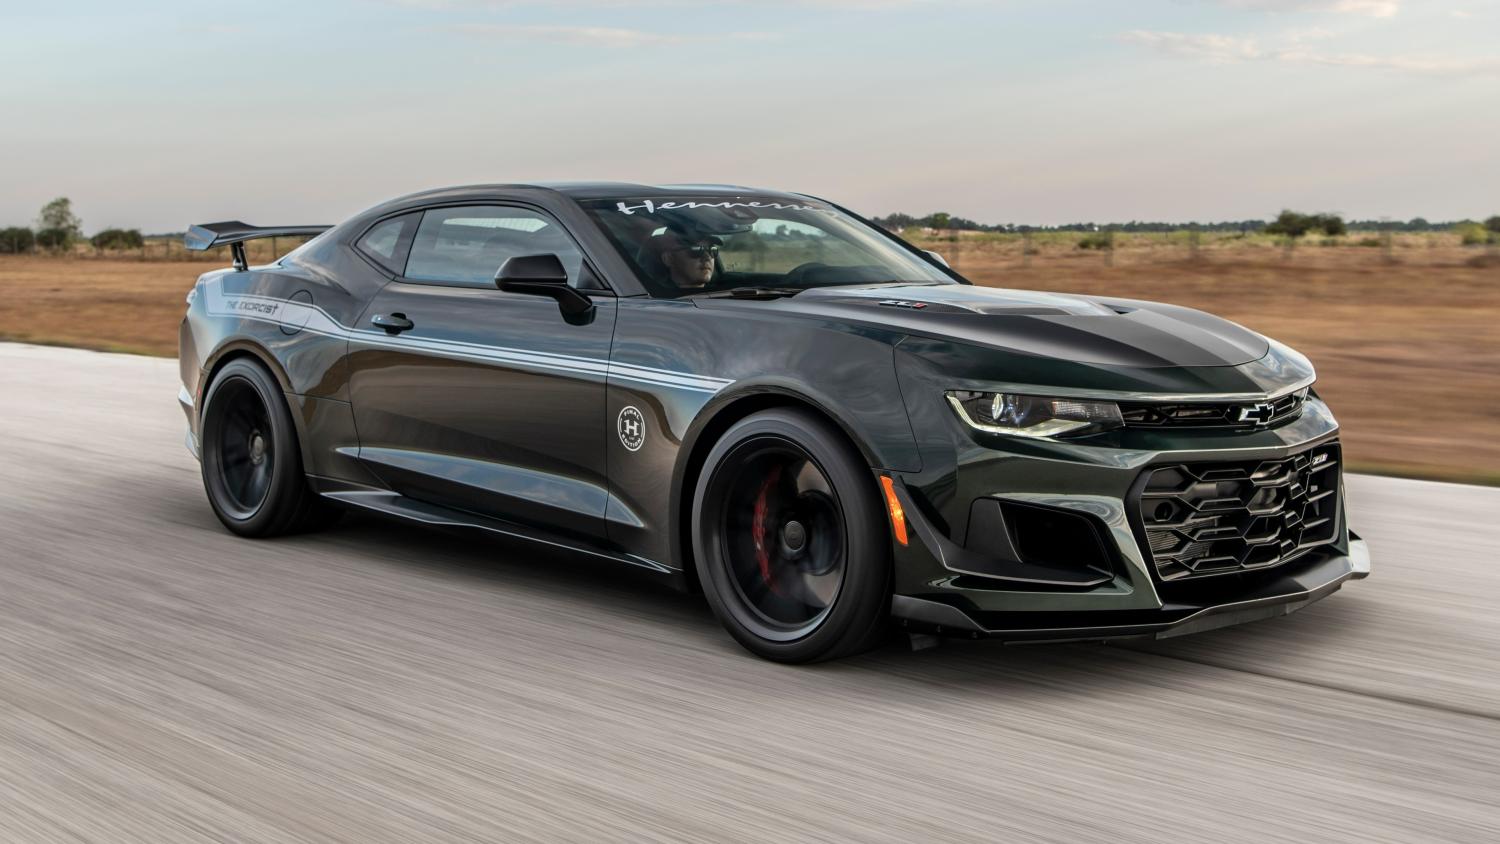 1,000bhp Hennessey Exorcist Final Edition Arrives to Expel Demons Once and For All